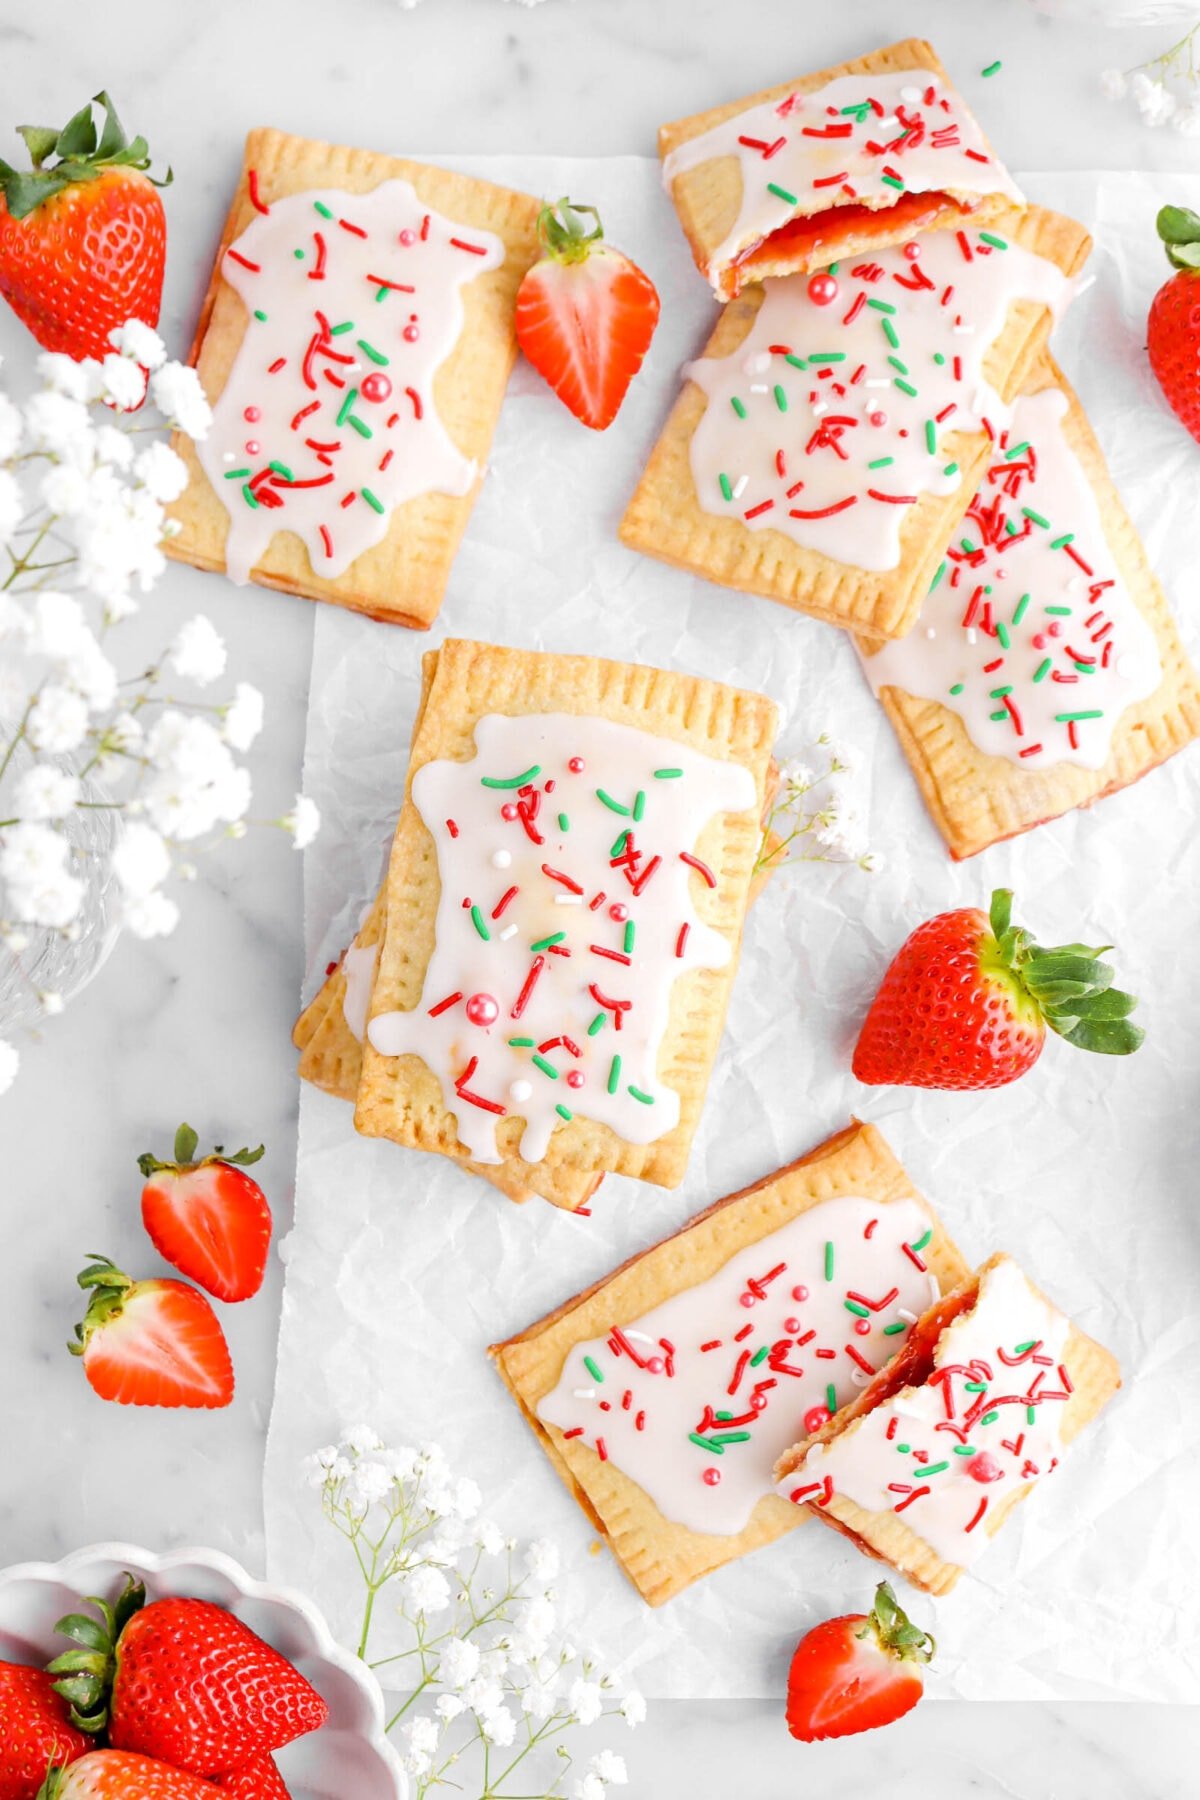 pop tarts on parchment paper with strawberries and white flowers around.